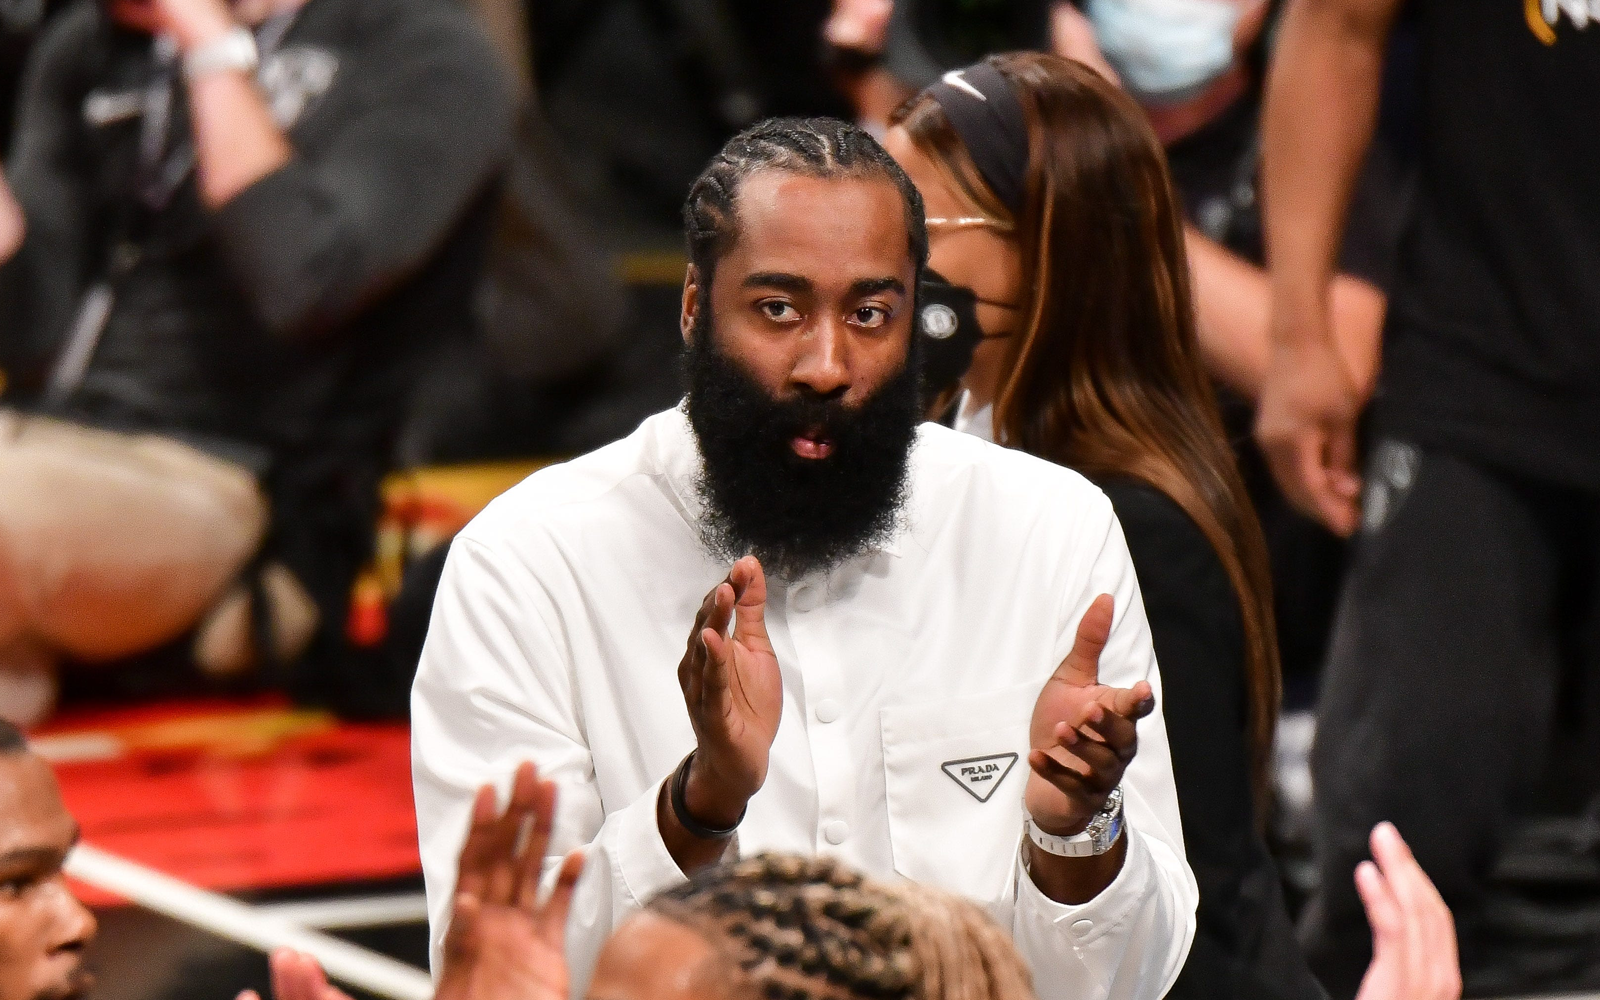 James Harden Outfit from March 8, 2022